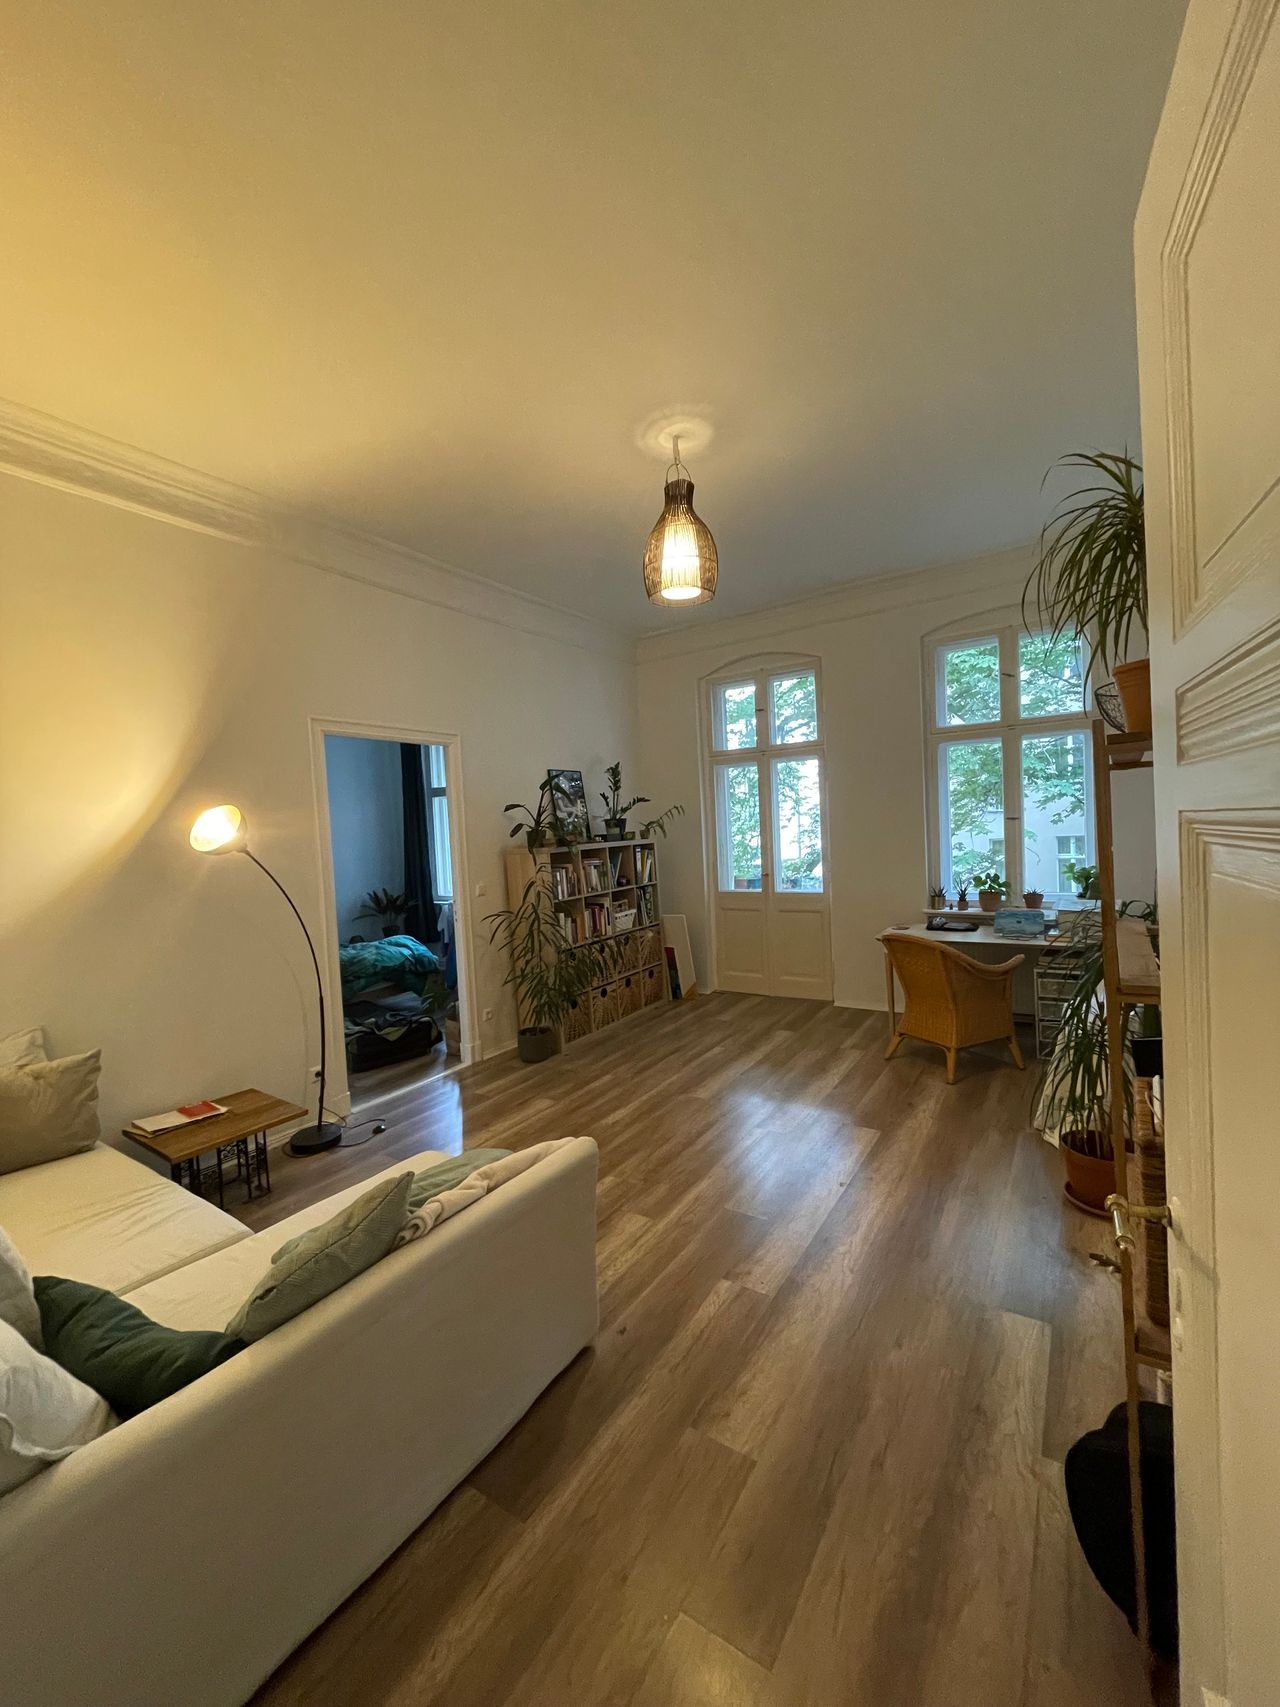 Beautiful, renovated flat in an old building in an idyllic, quiet location with good S+U connections